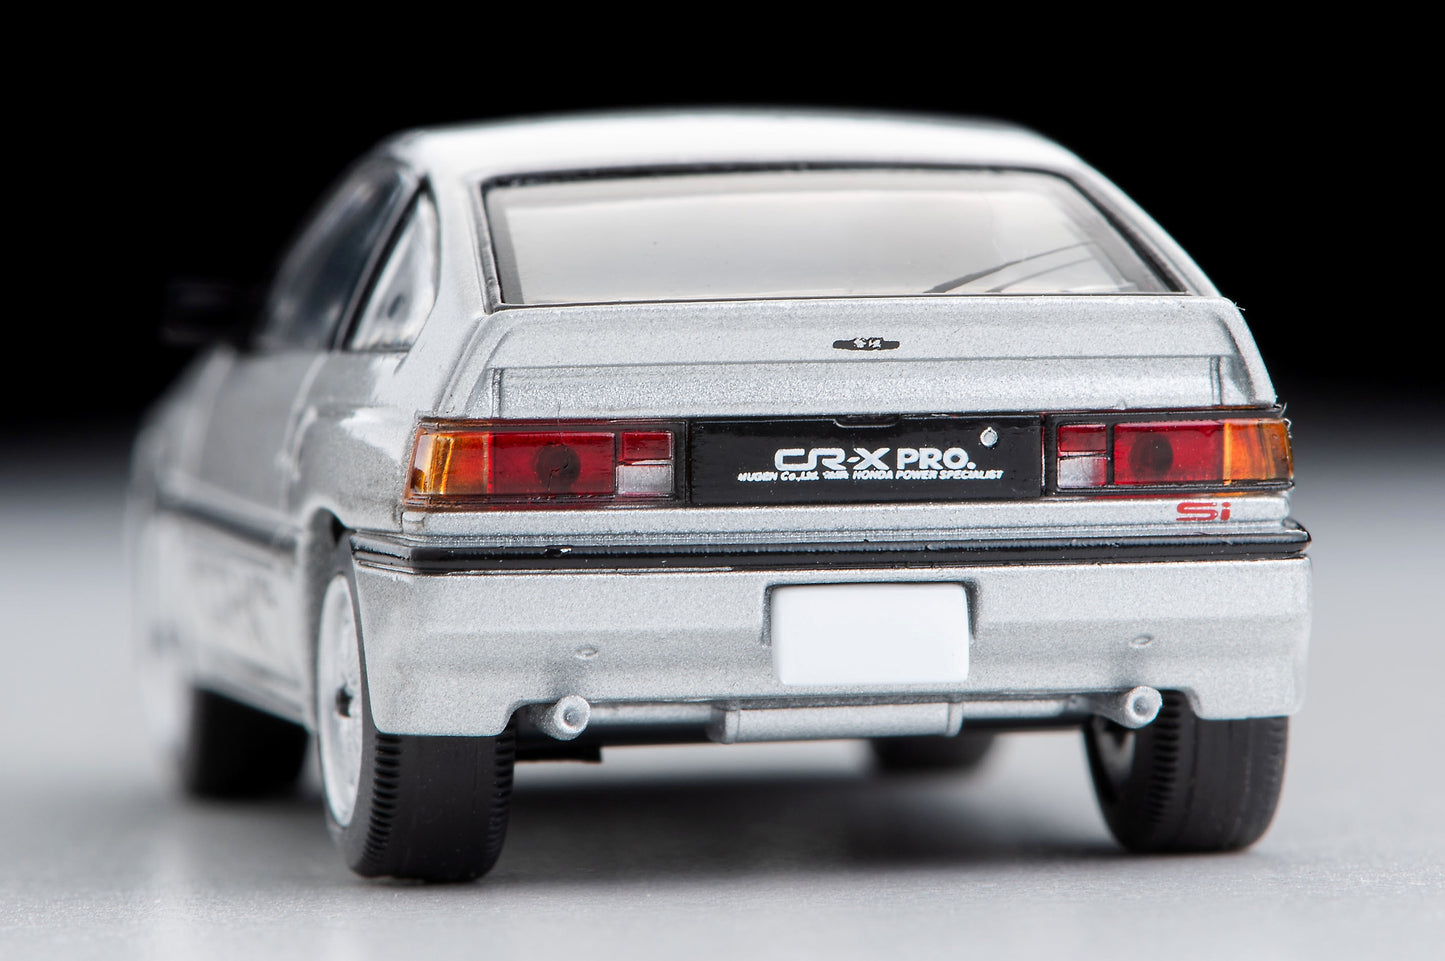 TLV NEO 1/64 LV-N303a ホンダ バラードスポーツCR-X MUGEN CR-X PRO（銀）後期型